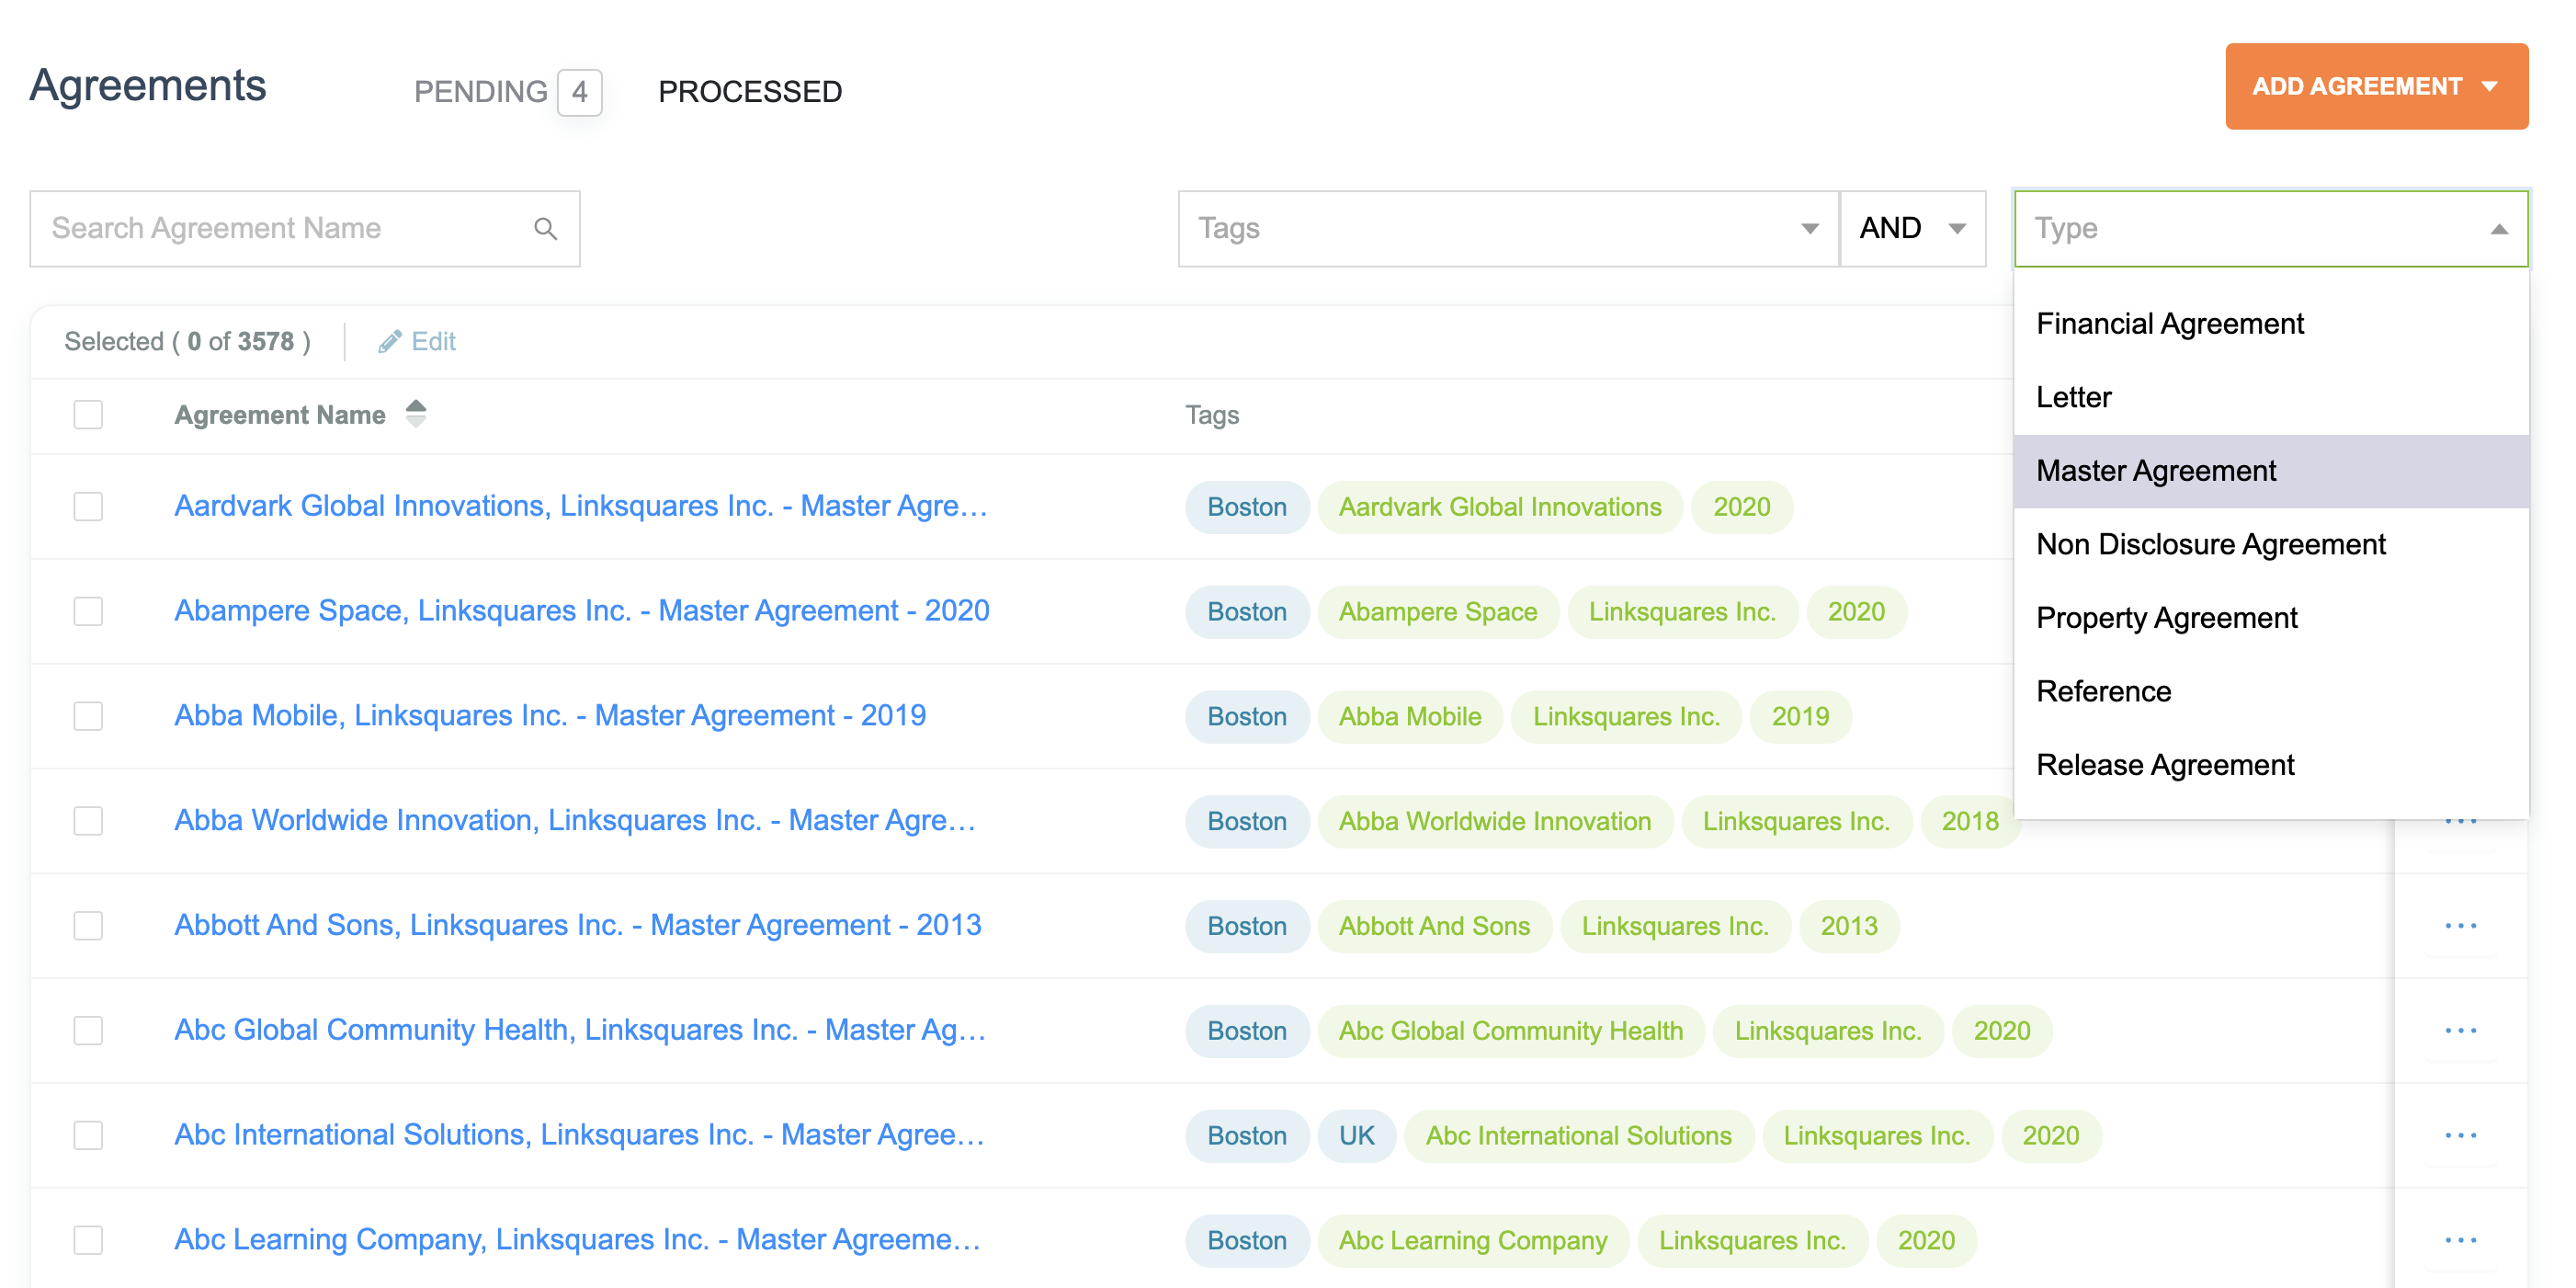 Store, organize, and manage all your agreements in one place